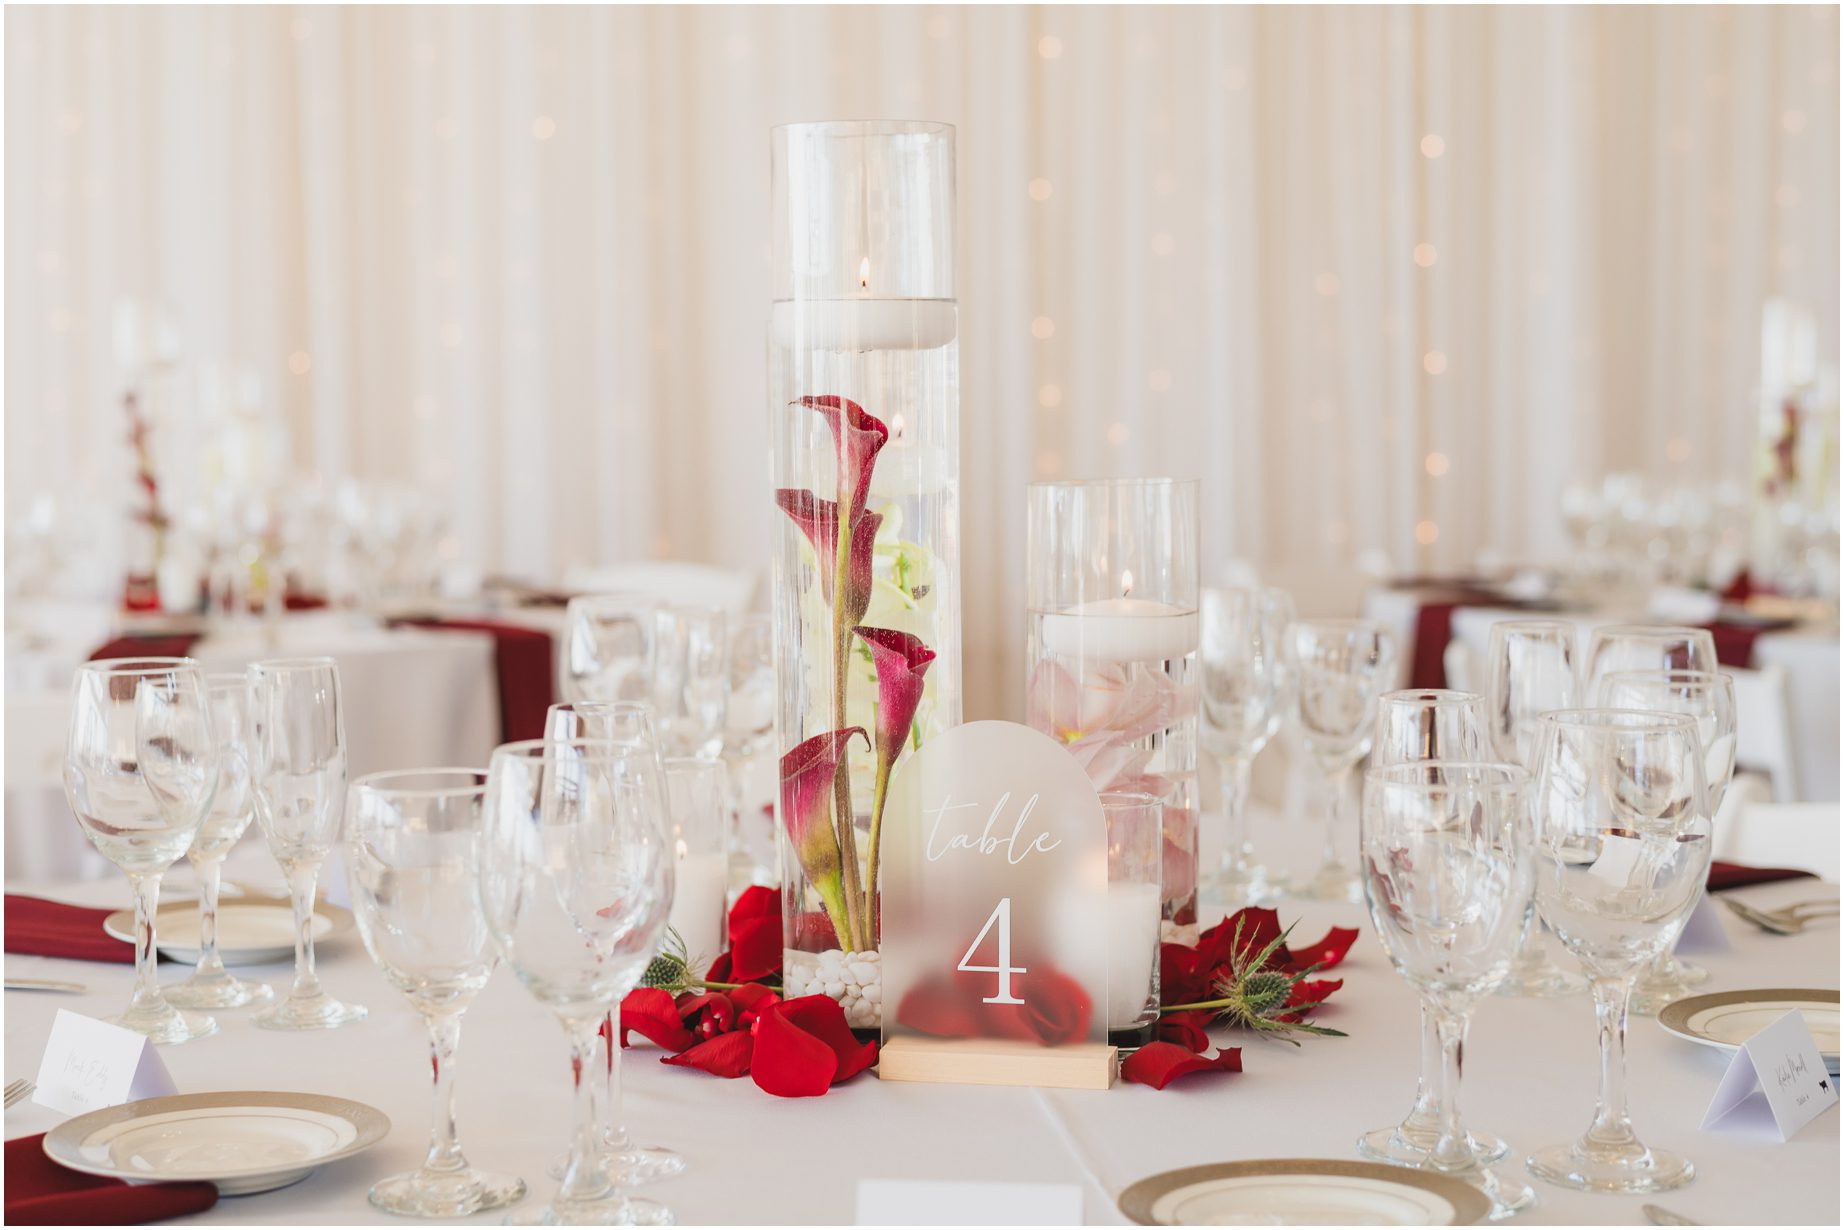 Wedding centerpiece featuring red flowers and white fabric at Malibu west beach club